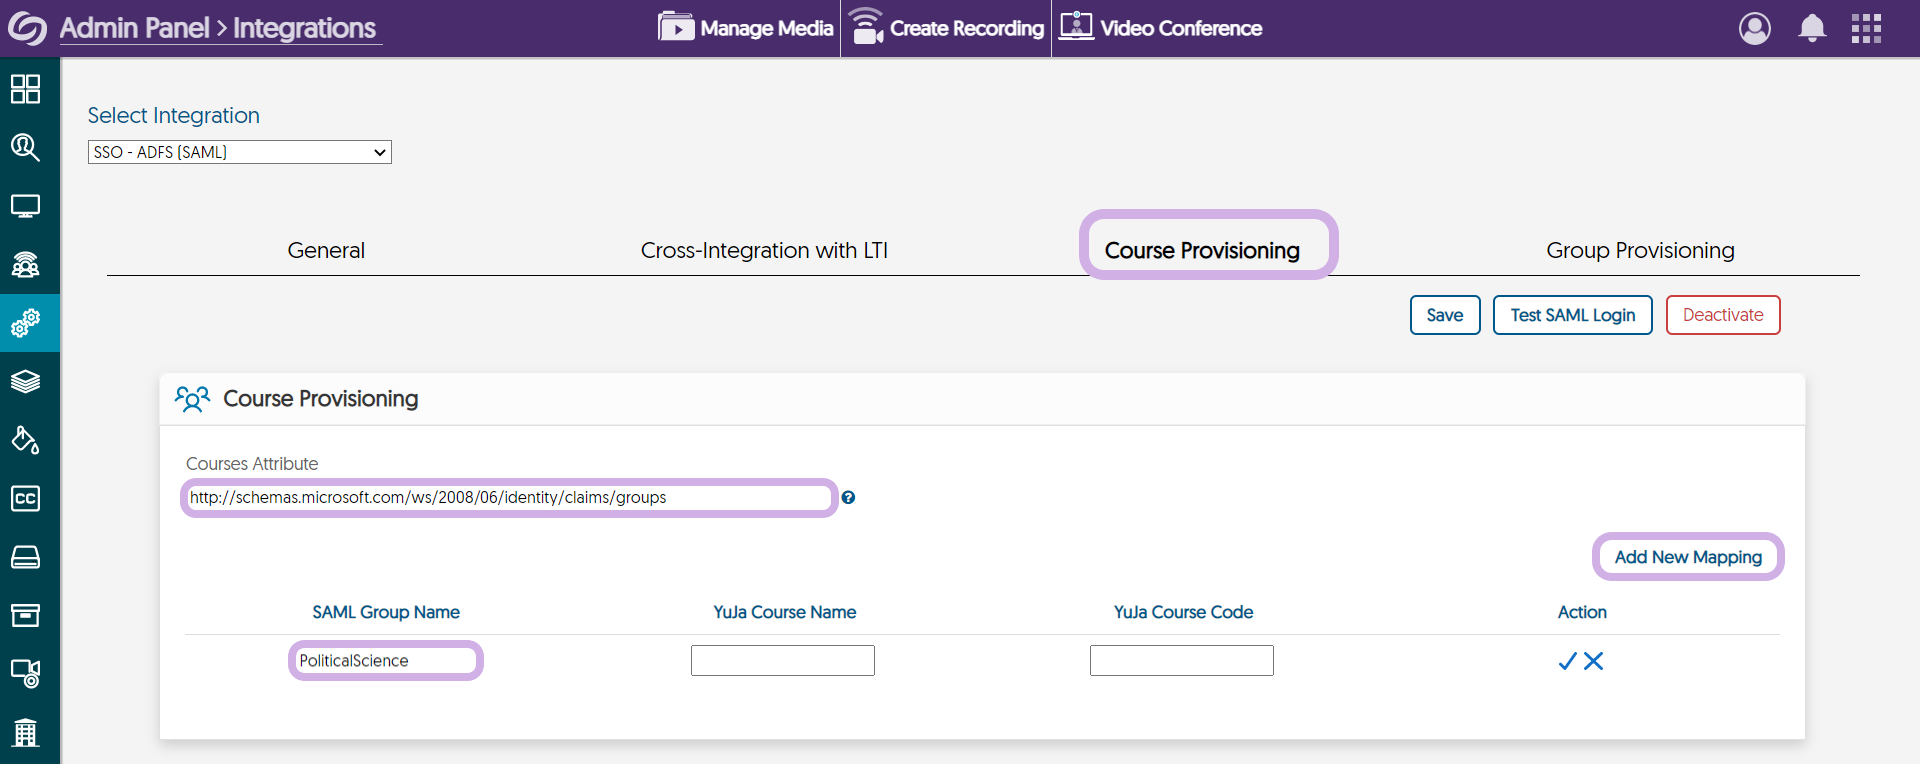 The course provisioning tab is selected. Add new mapping is located to the far-right of the page and is selected. the course attribute is entered into the course attribute field located to the left of the page. UNderneath course attribute, the SAML Group Name is entered.